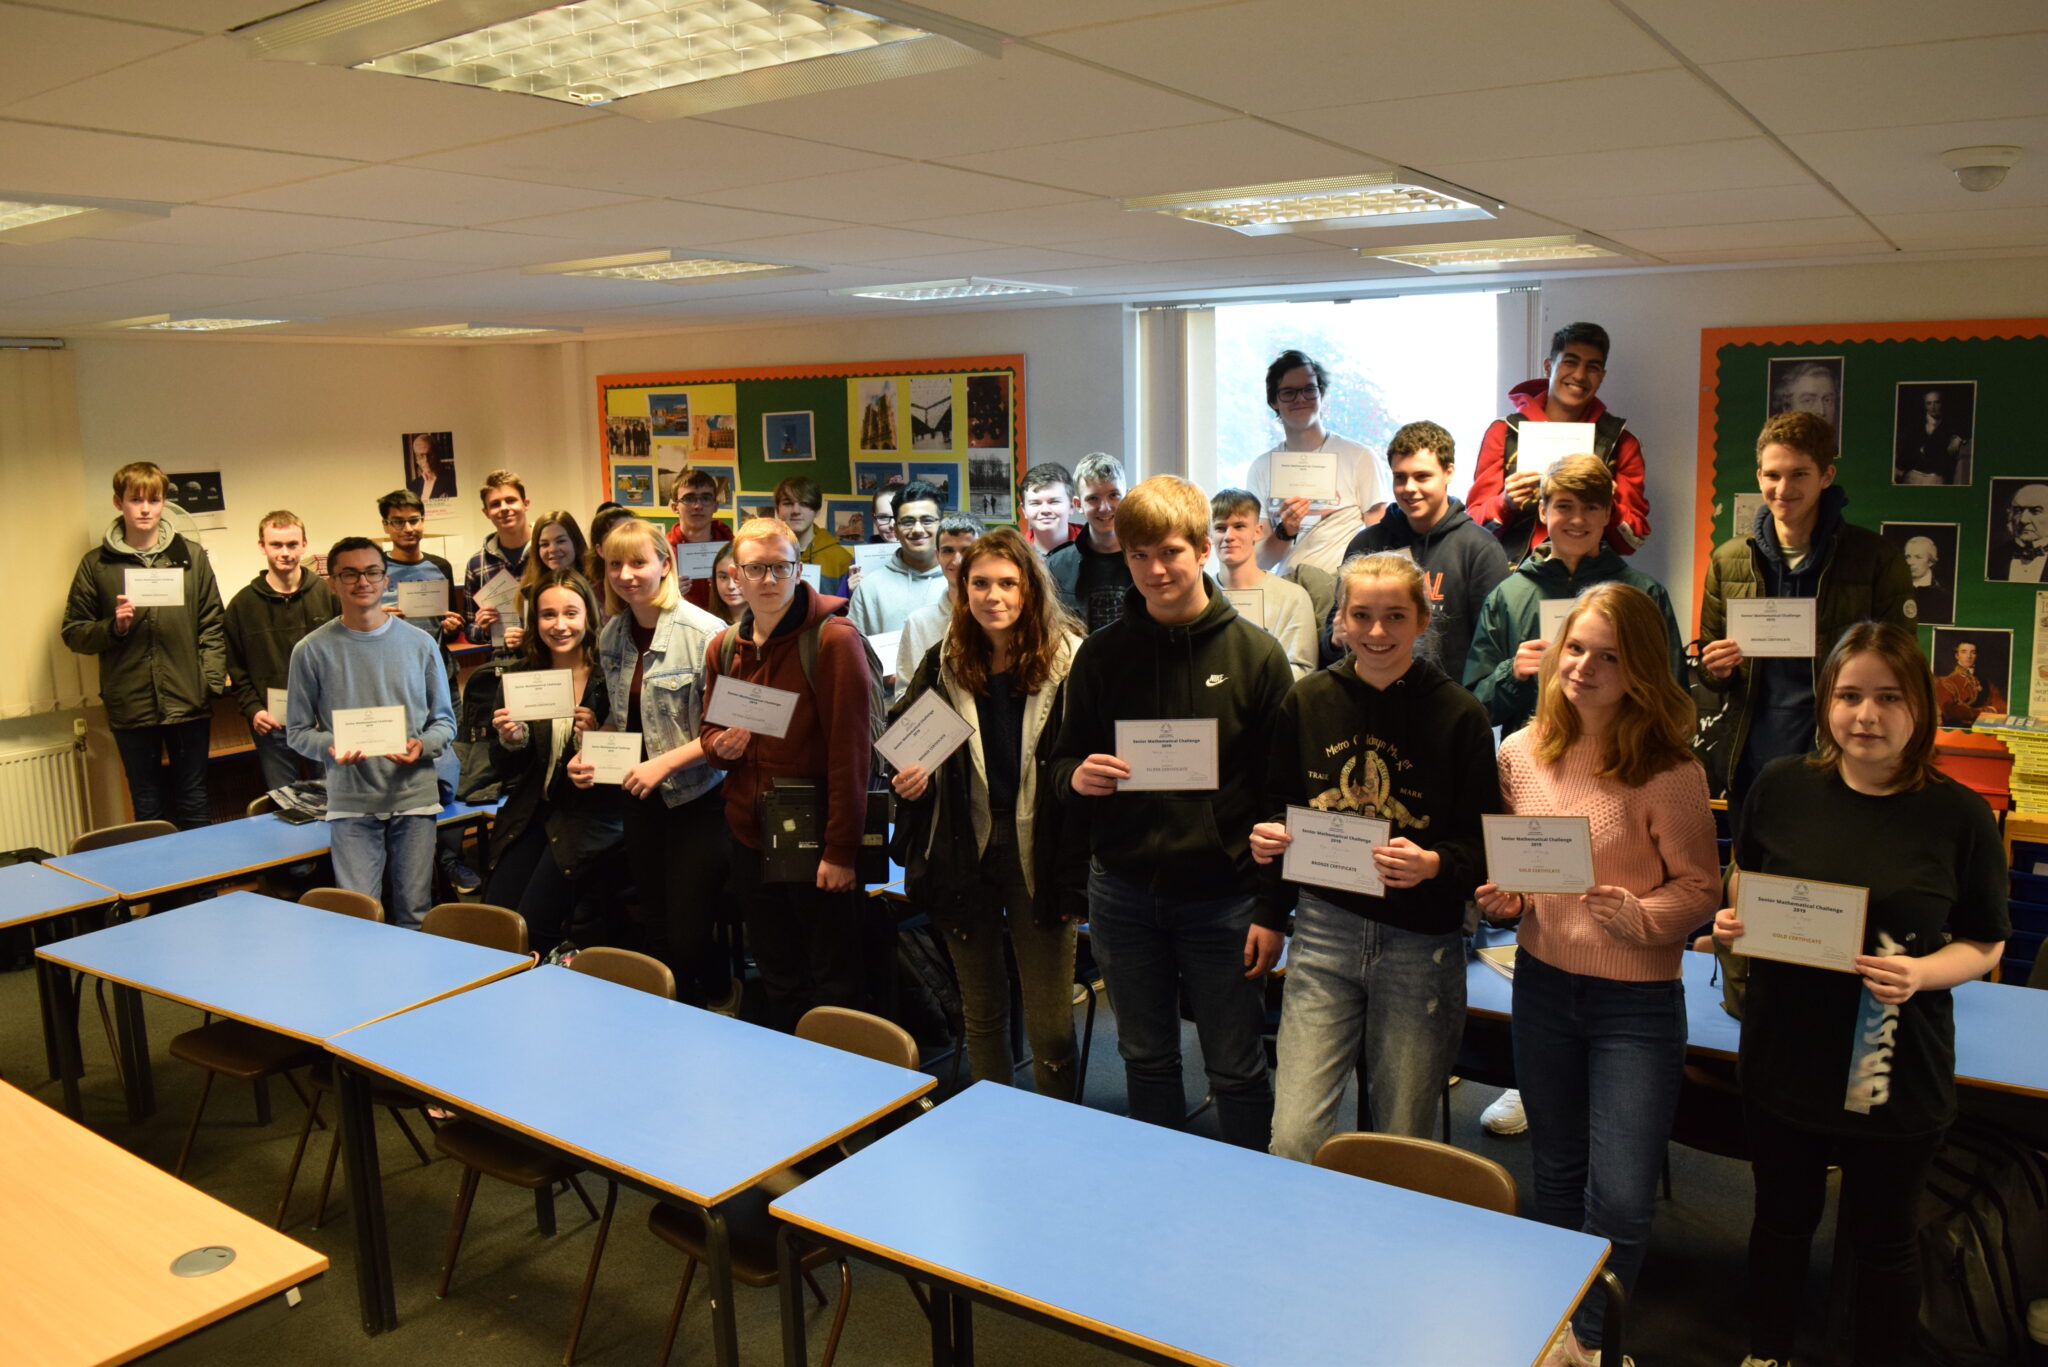 Students awarded Maths Challenge certificates